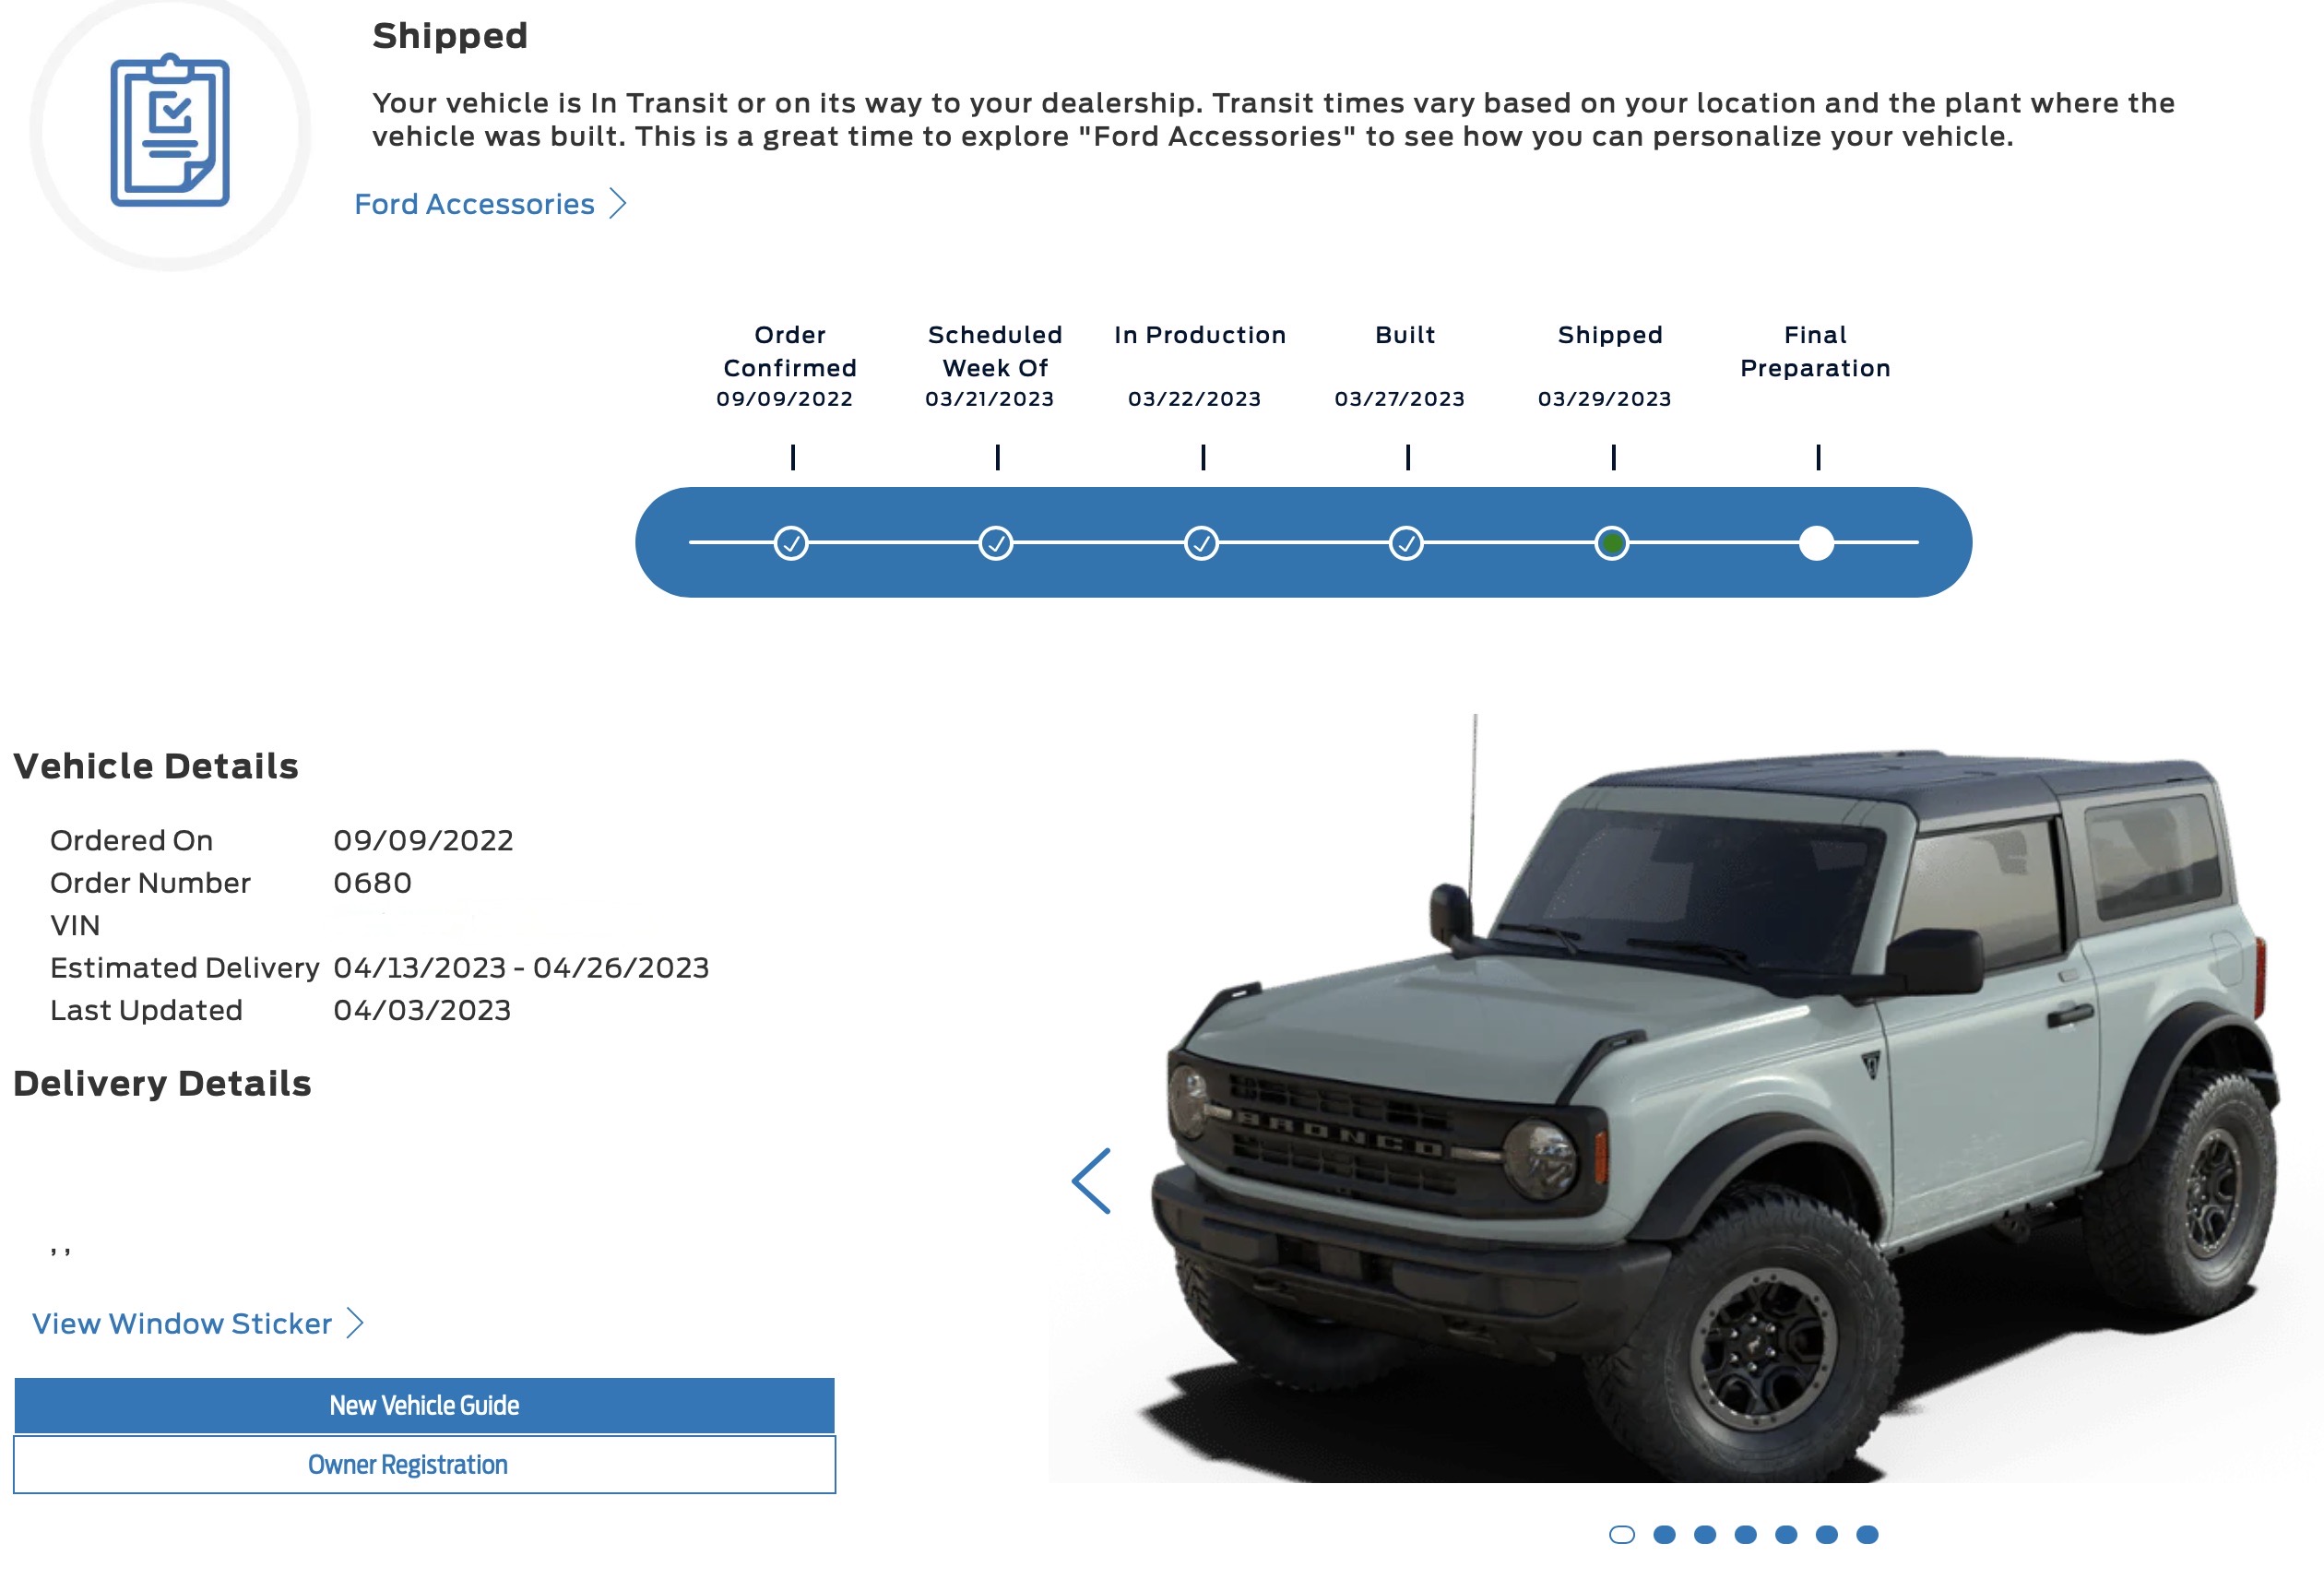 Ford Bronco BaseSquatch models built in 2023, shipping status Screen Shot 2023-04-05 at 8.29.54 AM